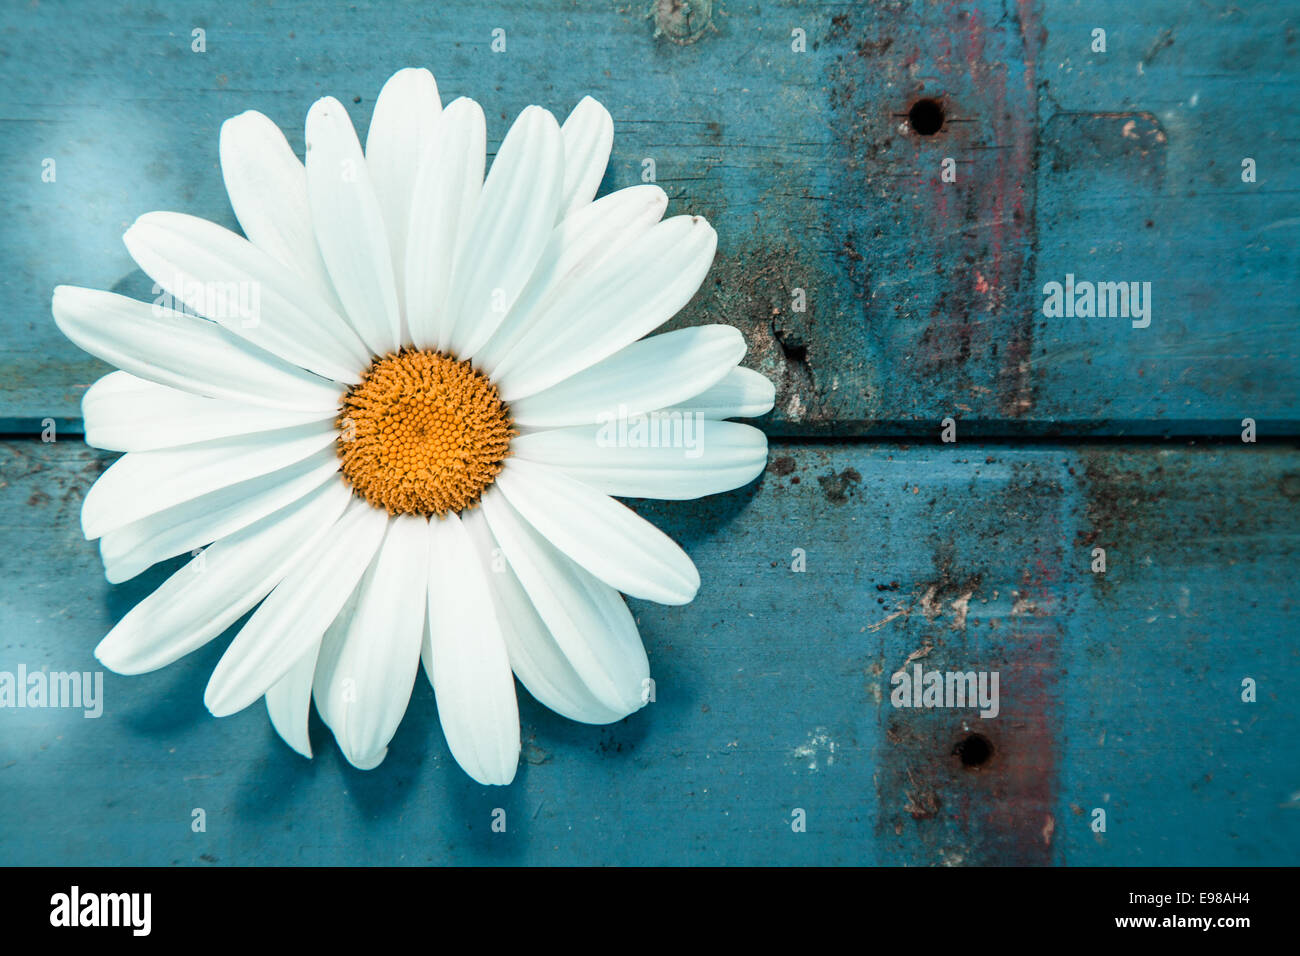 Close-up of a daisy on a worn wooden surface painted in blue, shot from high angle Stock Photo